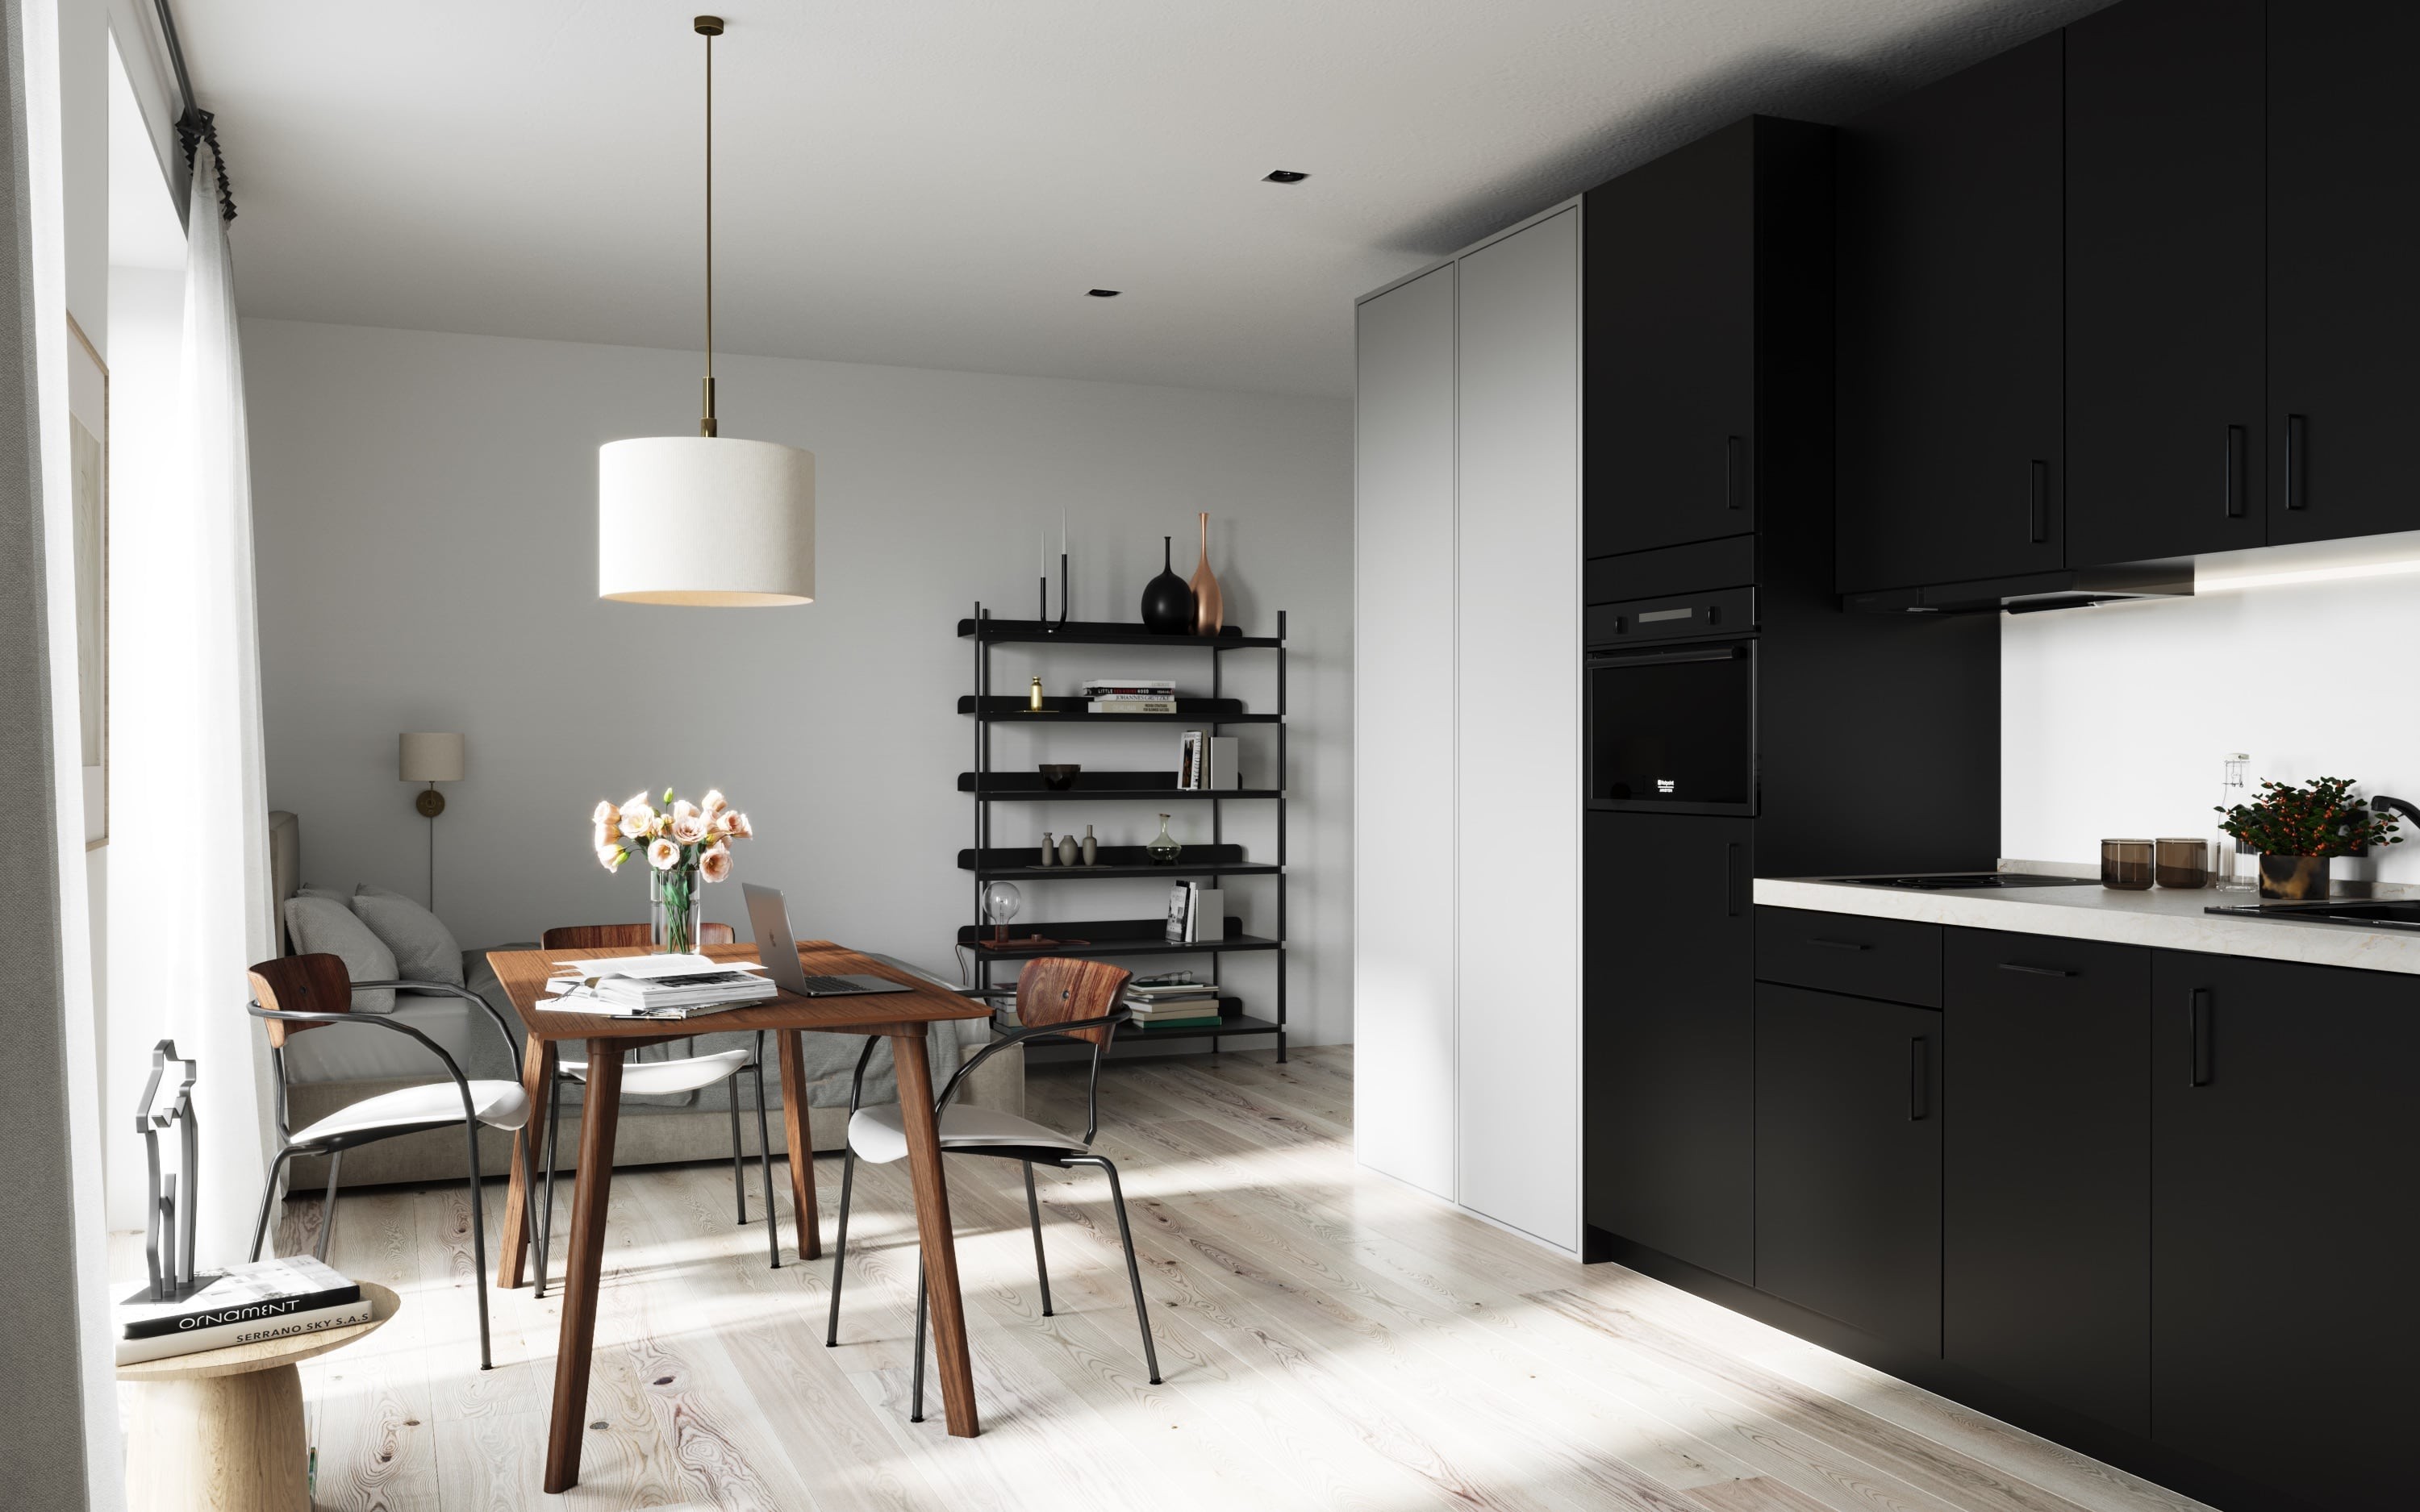 3D Architectural Interior Visualization of a small flat with kitchen and living room in Hamburg Eimsbüttel, Germany